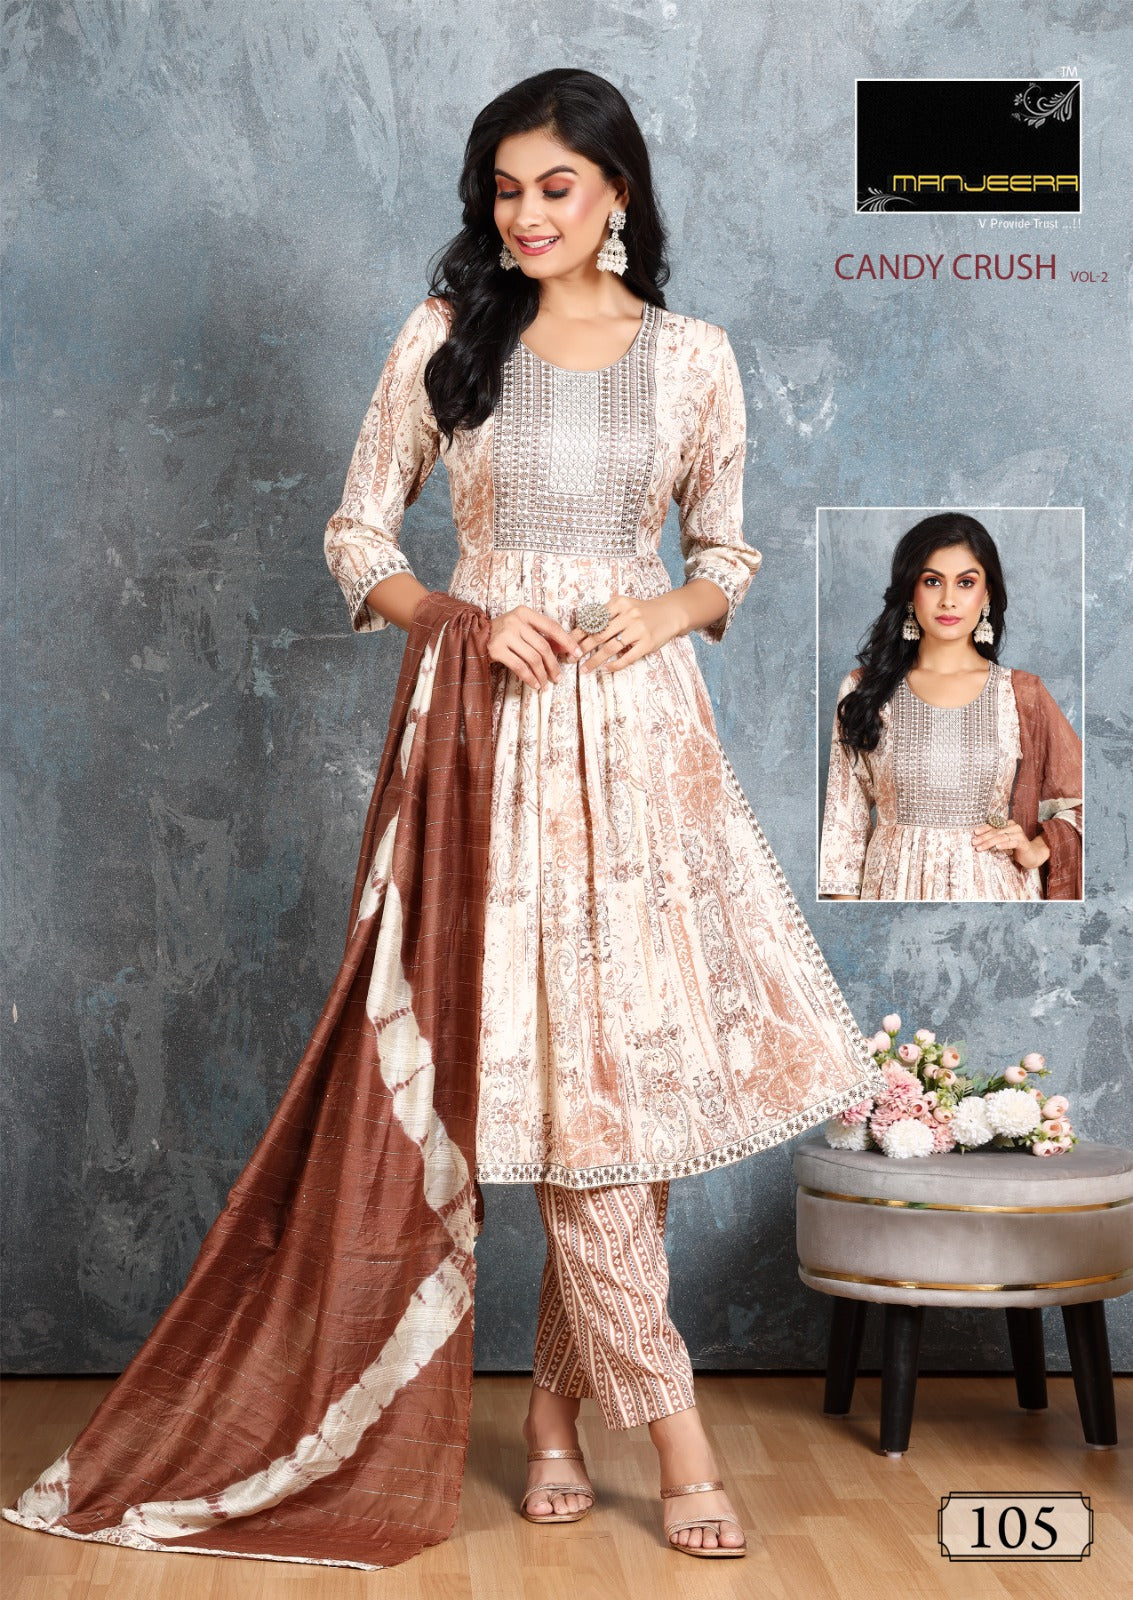 Candy Crush Vol 2 Manjeera Readymade Pant Style Suits